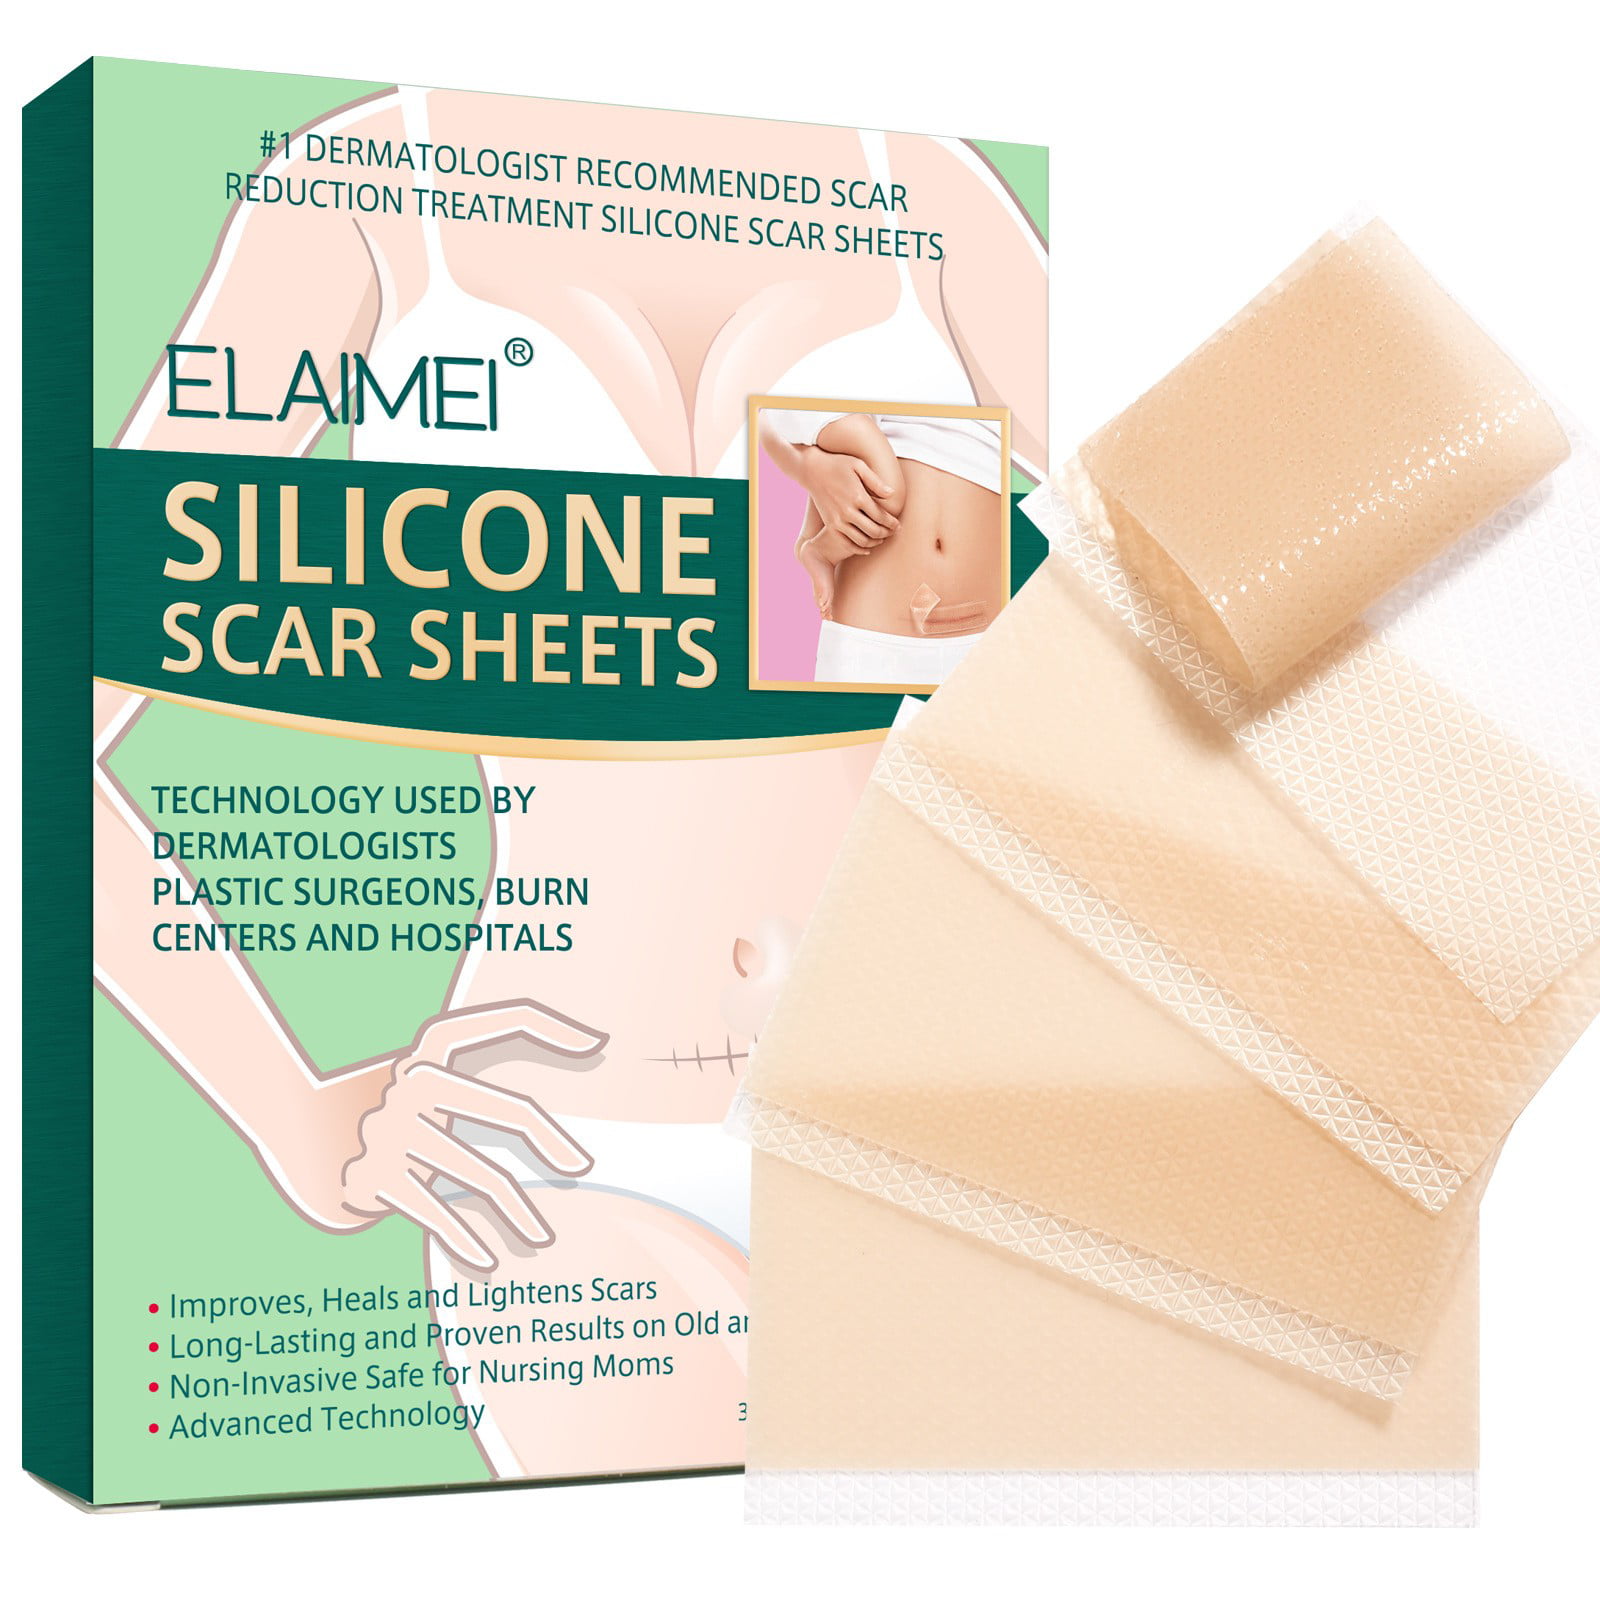 SILICONE SHEET CLEAR 20x30cm Against scars